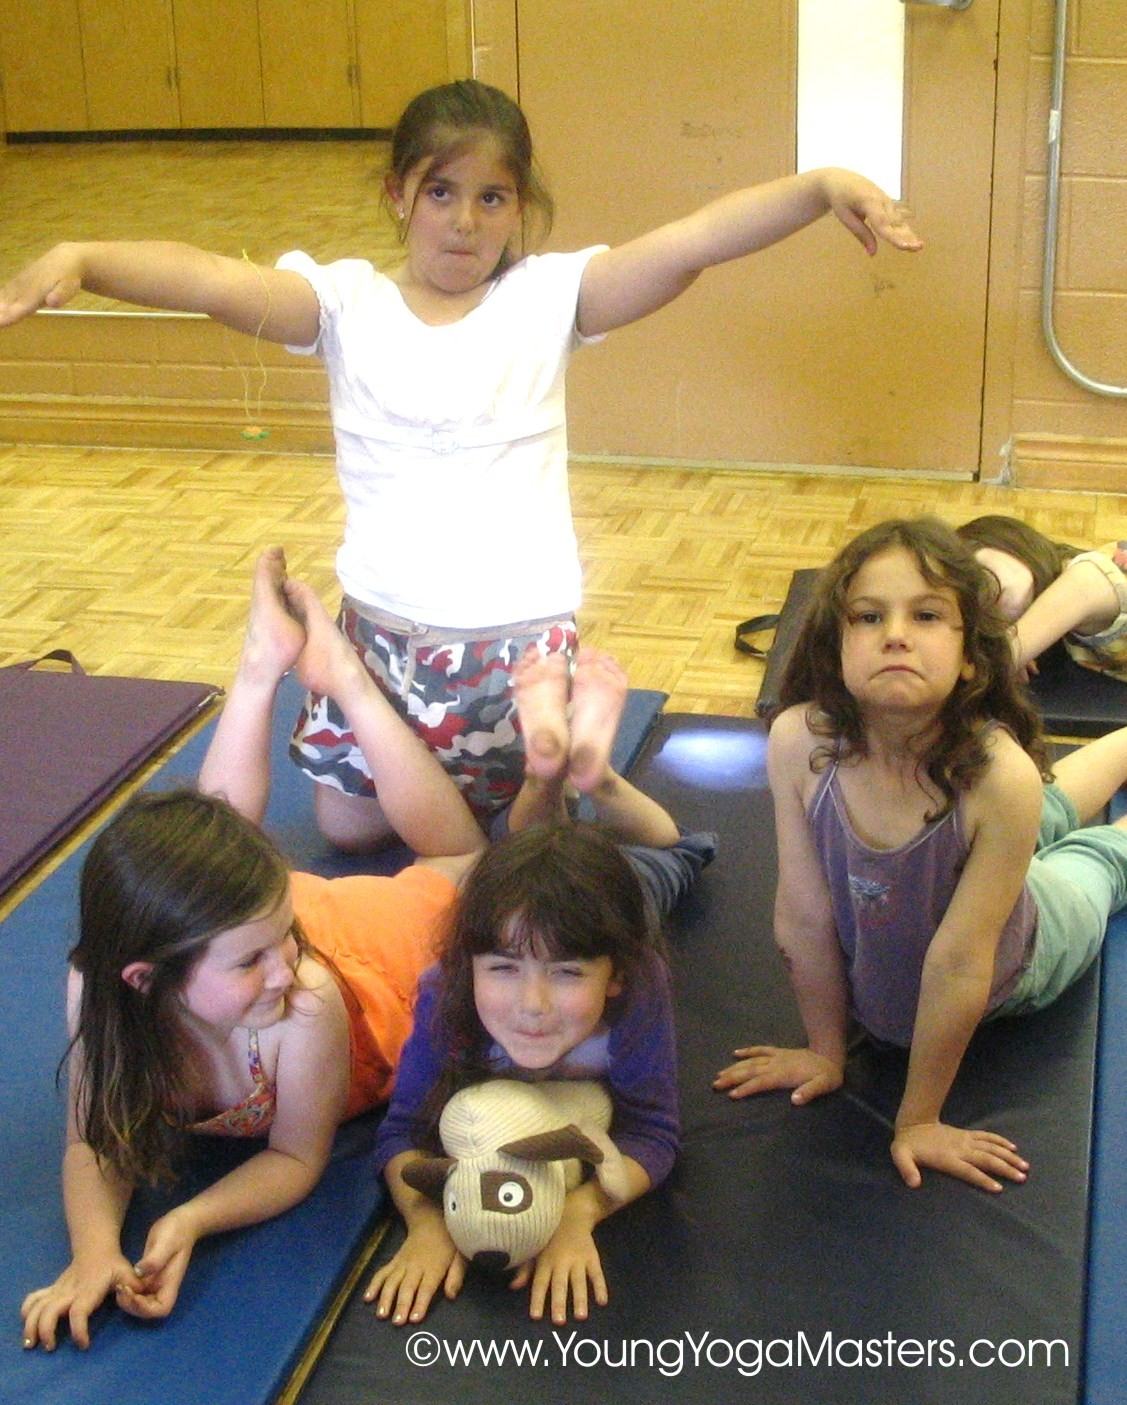 Yoga is Playful and Helps Kids 